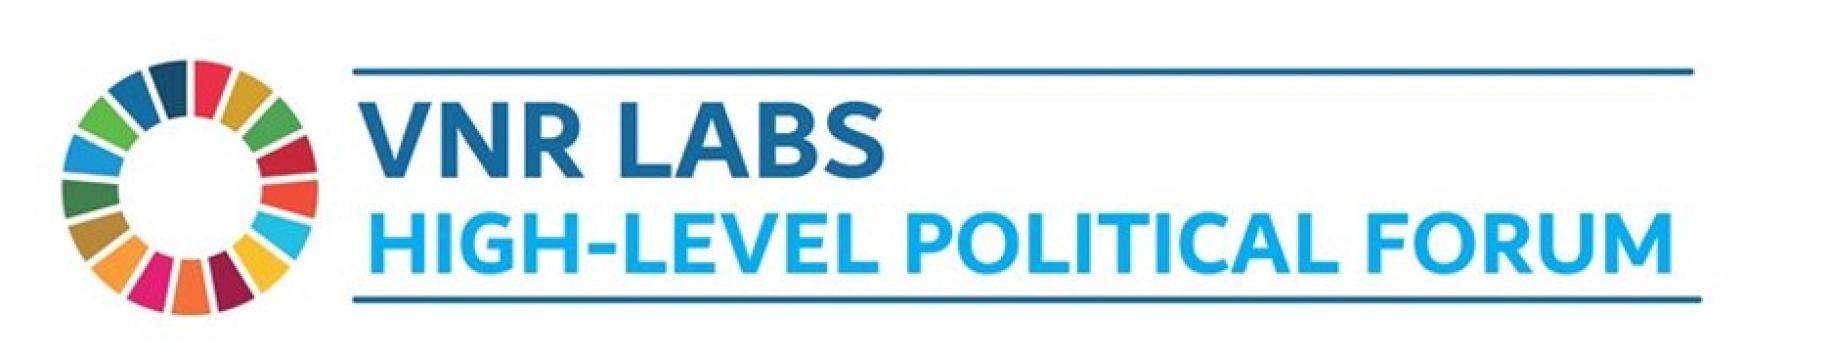 VNR Labs banner shows the SDG wheel with the title VNR Labs: High-level Political Forum